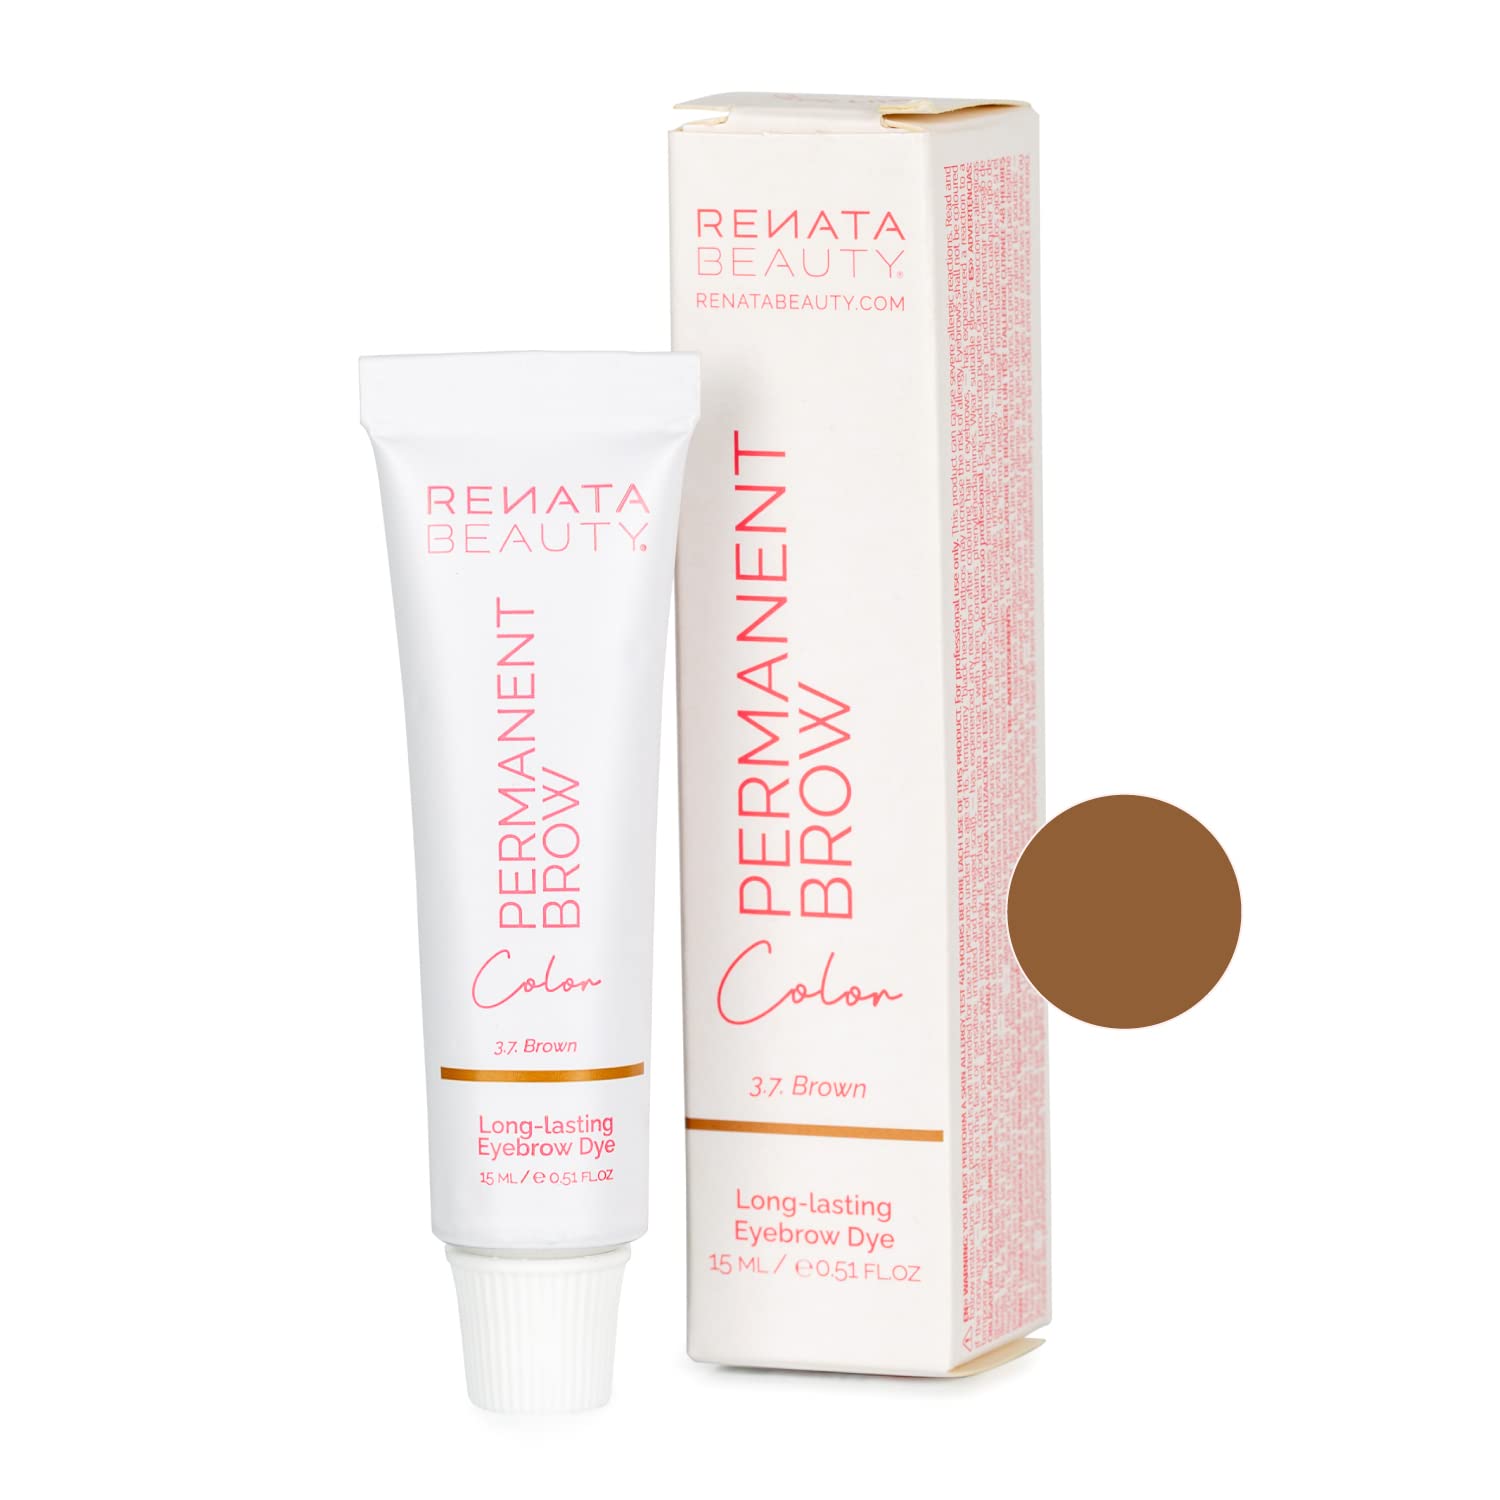 RB RENATA BEAUTY Renata Beauty Eyebrow Colour - Premium Eyebrow Dye - 15ml Adjustable and Long-lasting Eyebrow Colour for 5 Weeks - Safe and Gentle - Available in 3 Colours [Brown], brown ‎3.7